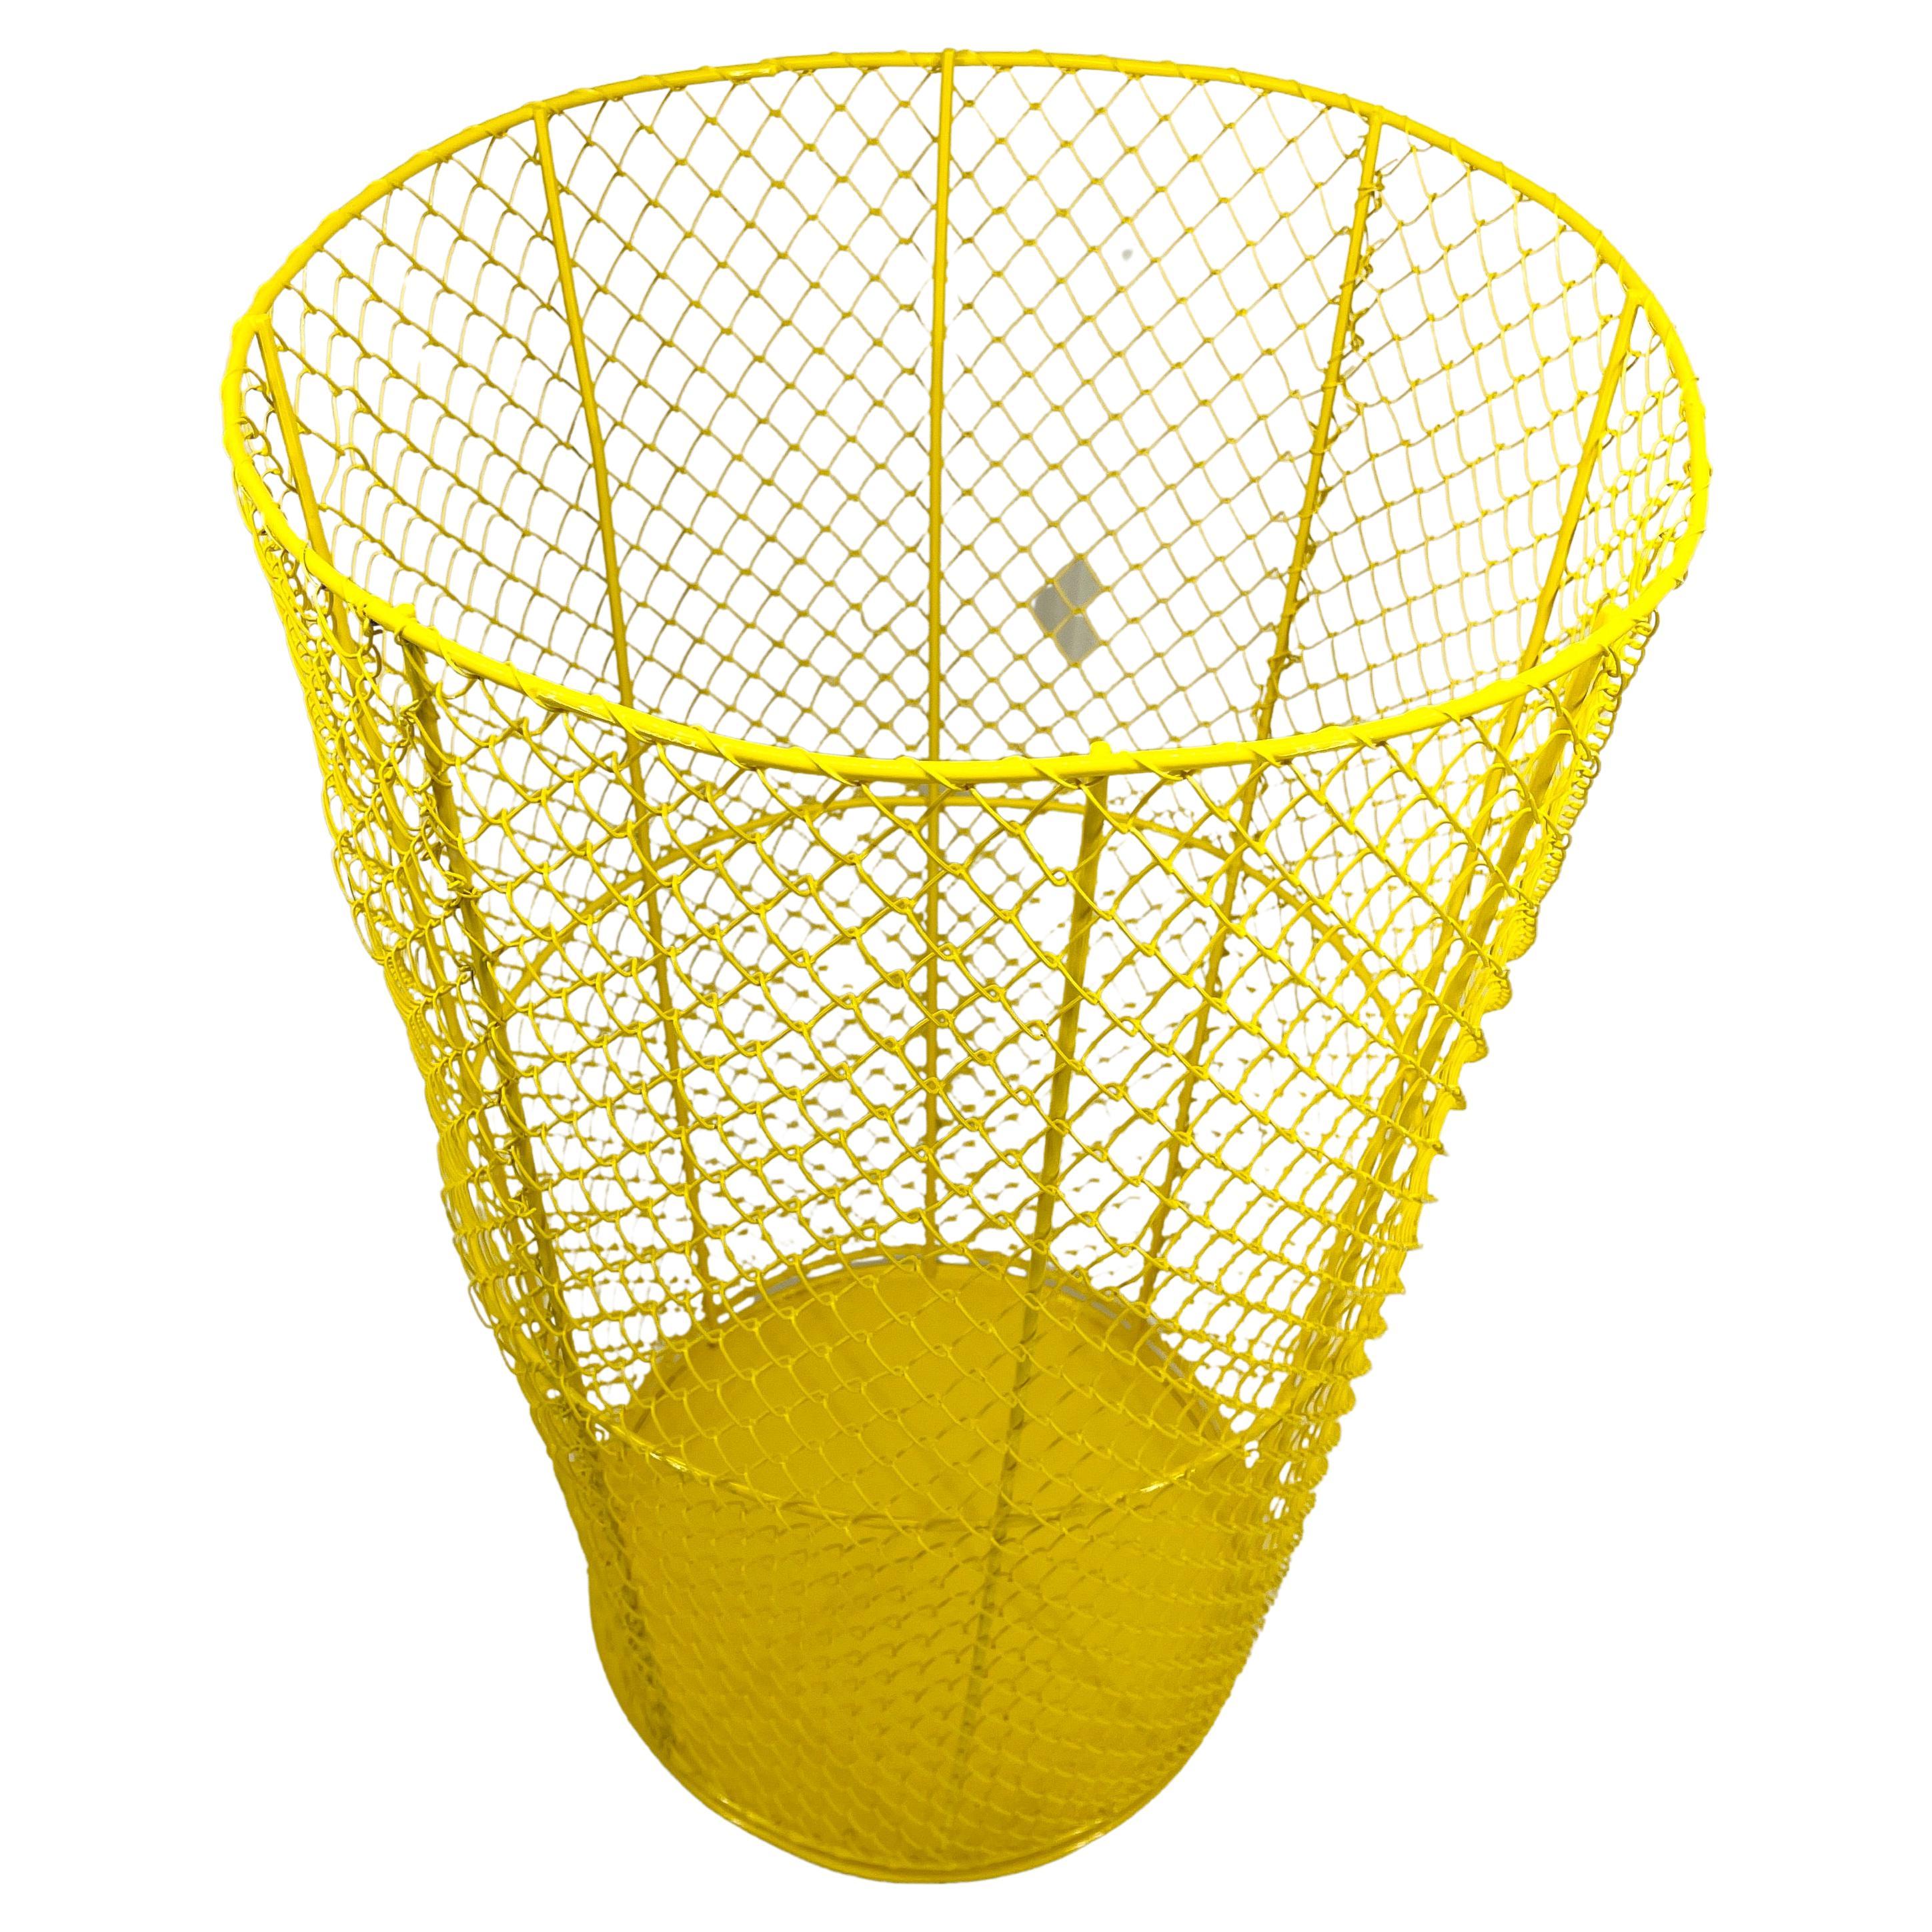 Mid-Century Modern tall metal trash can or hamper. This piece has been freshly powder coated in bright sunshine yellow. Tall and bright, this metal vessel is as attractive as it is functional. Perfect as a hamper for clothing or as a large trash